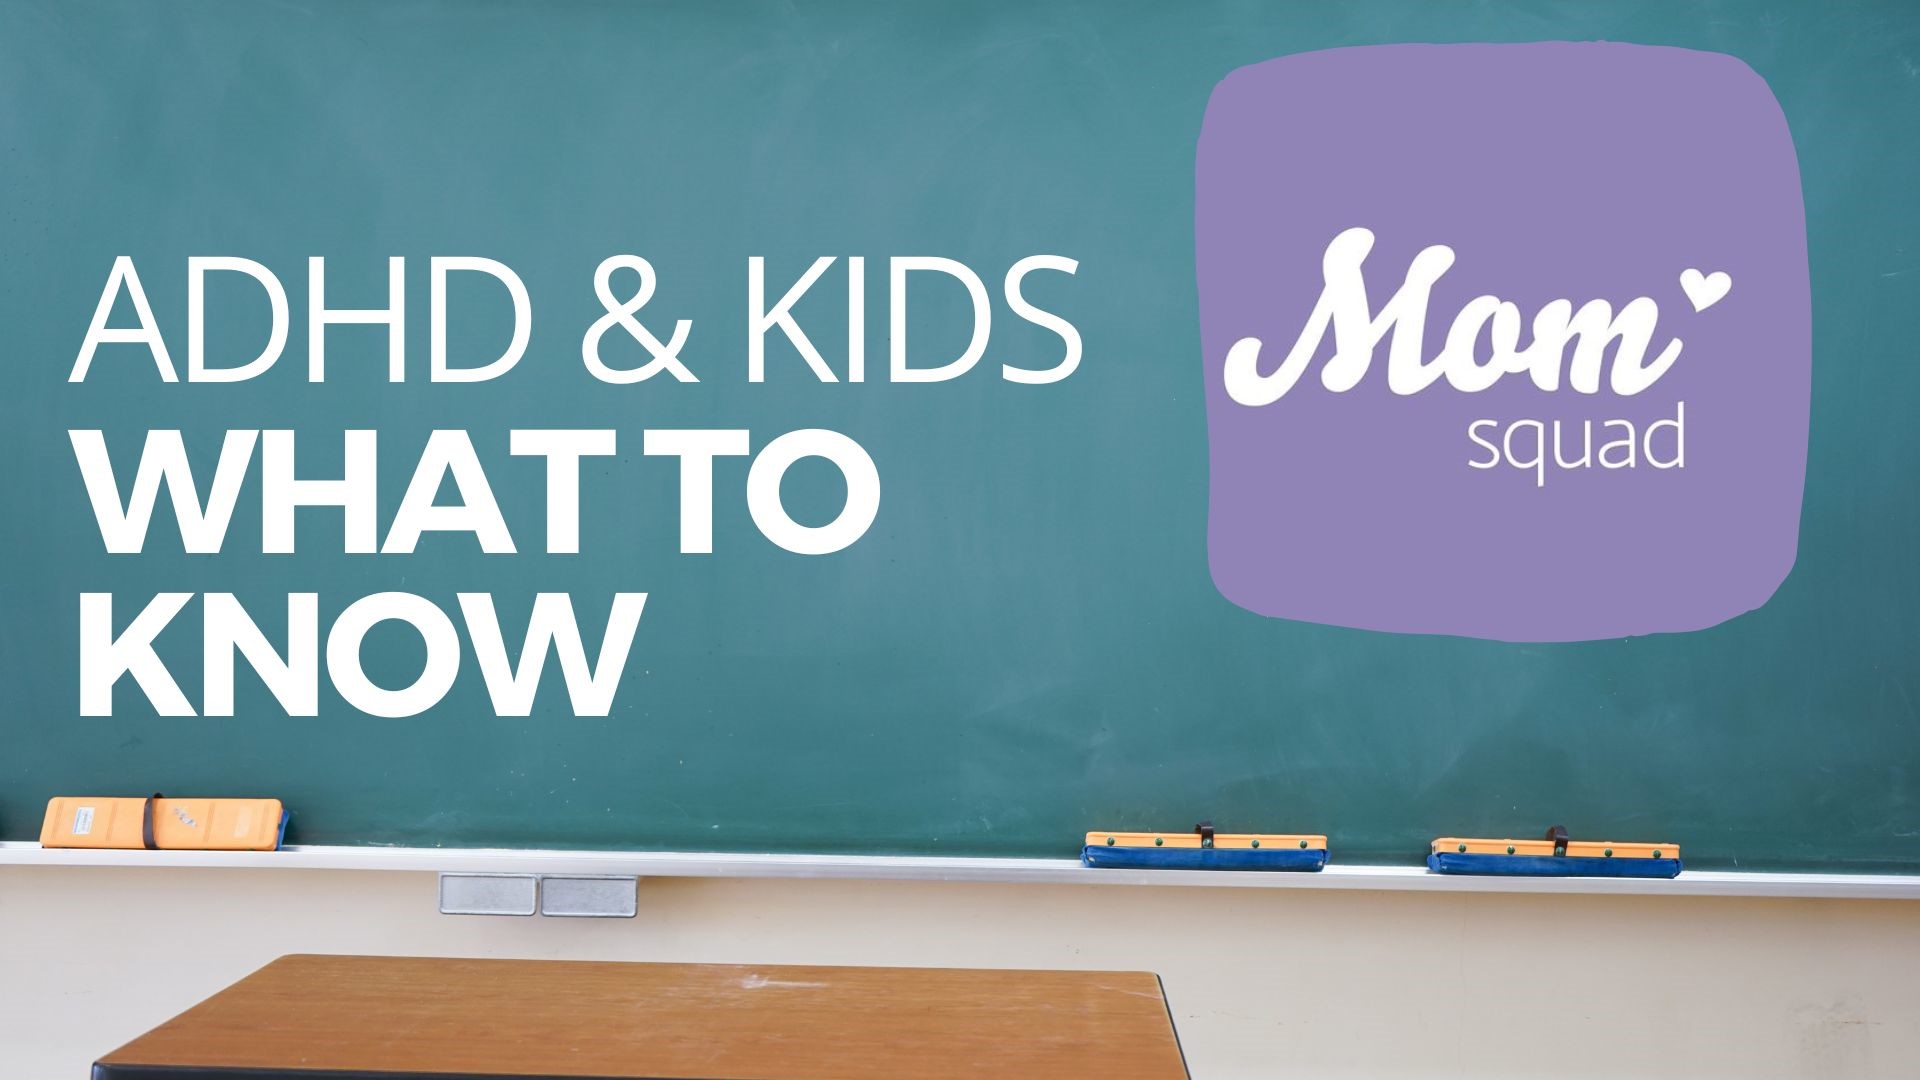 WKYC's Maureen Kyle explains what parents need to know about ADHD and children. Hear from one mom who deals with ADHD in her household and a doctor.